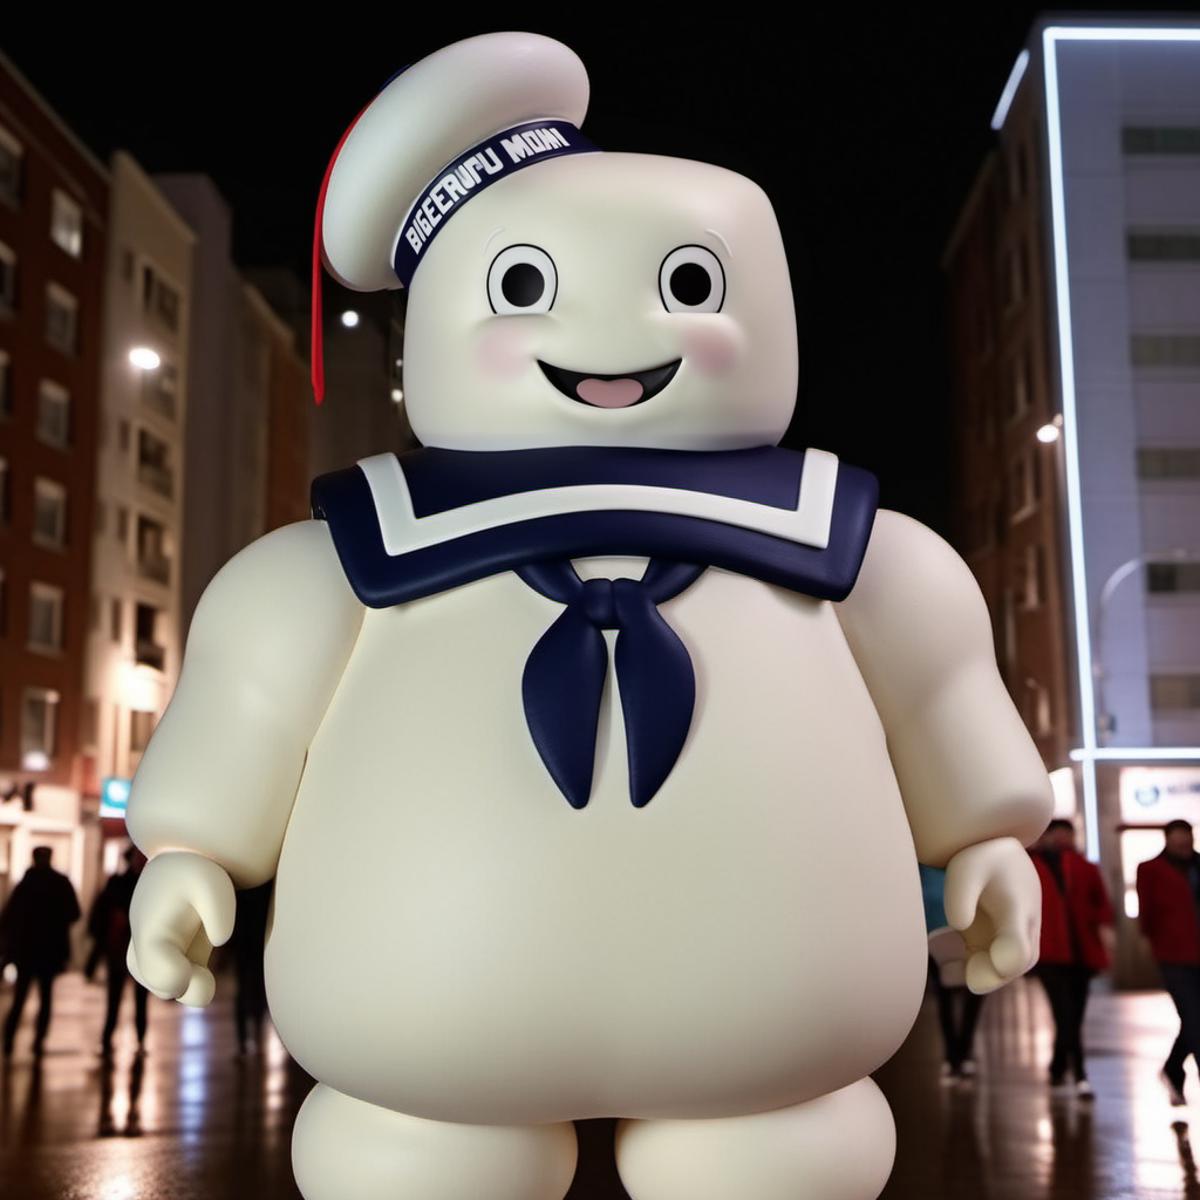 The Stay-Puft Marshmallow Man - Ghostbusters - SDXL image by PhotobAIt